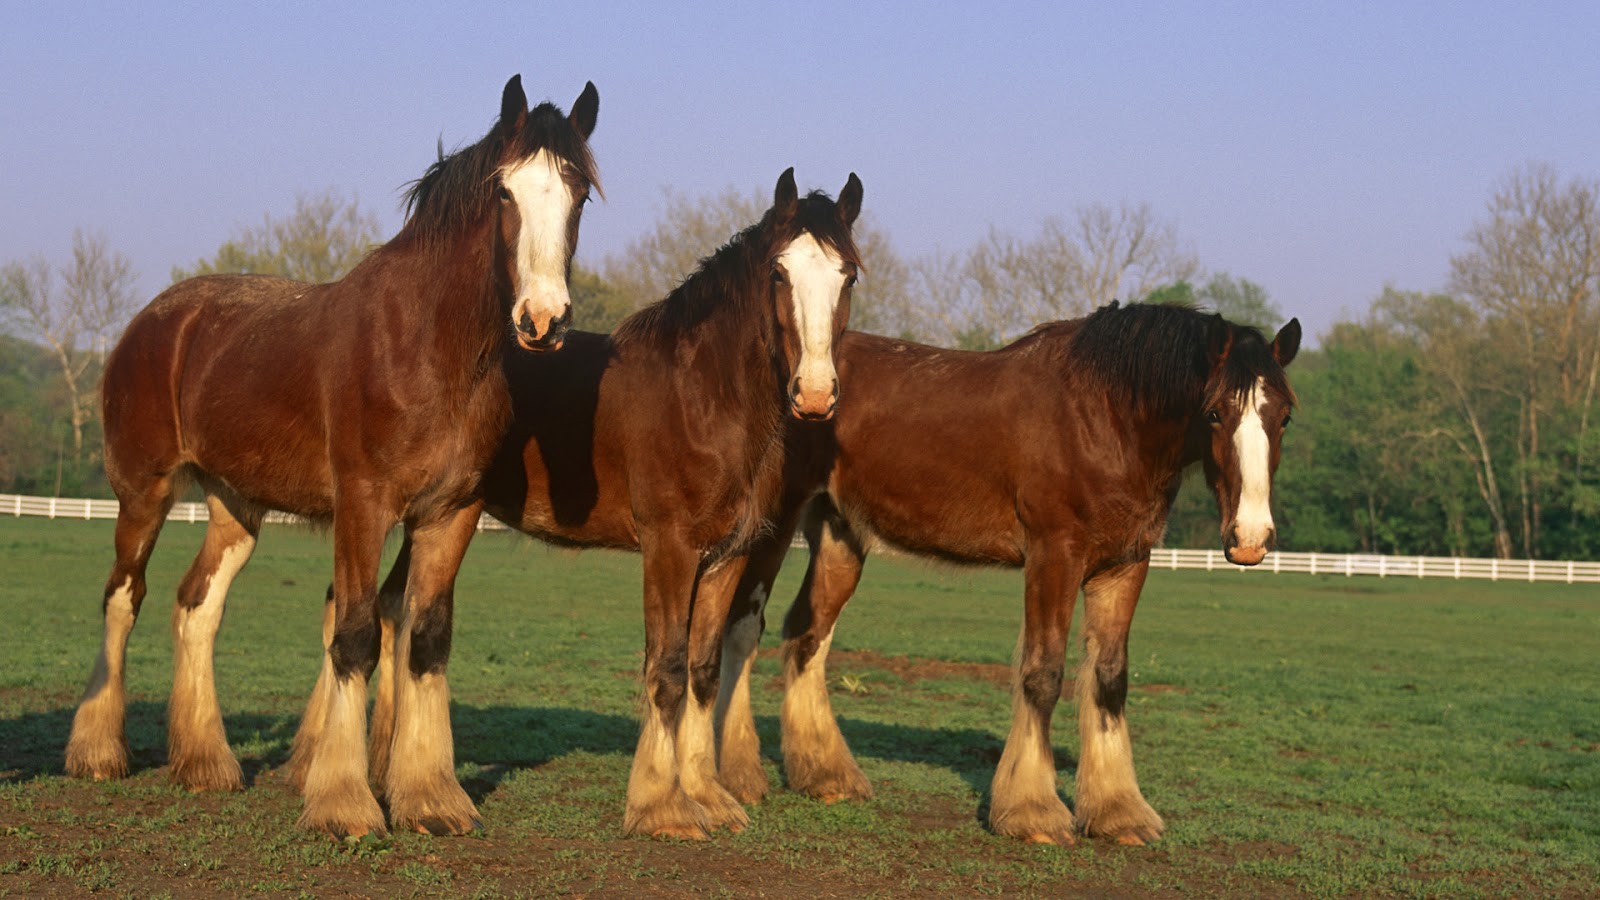 Animal Wallpaper Of Three Brown Horses On The Meadow Horse